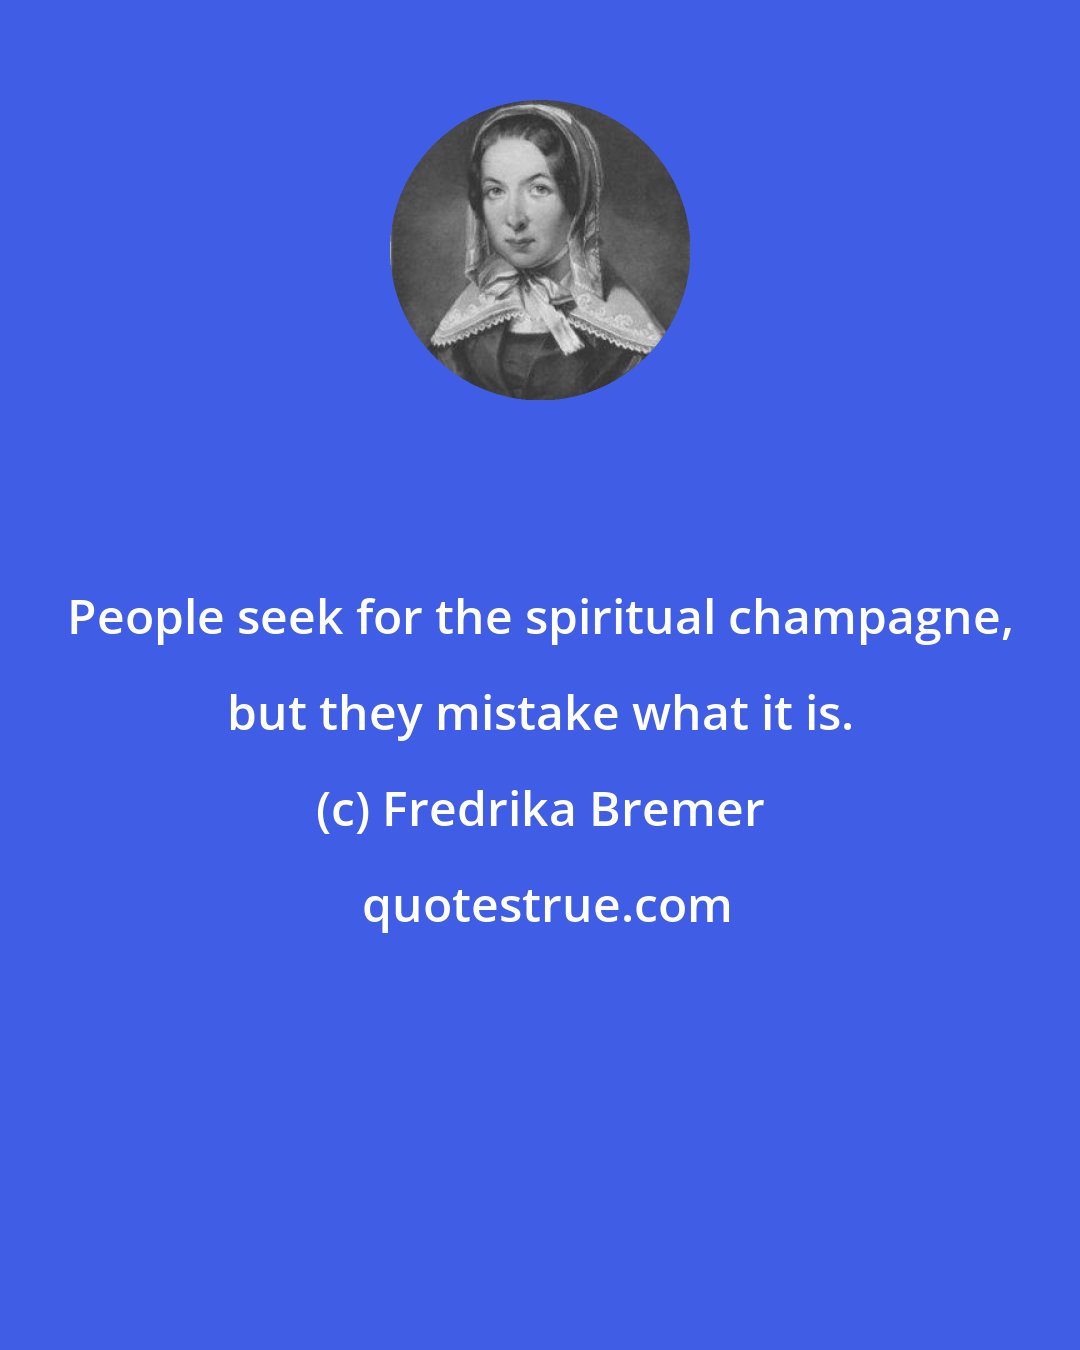 Fredrika Bremer: People seek for the spiritual champagne, but they mistake what it is.